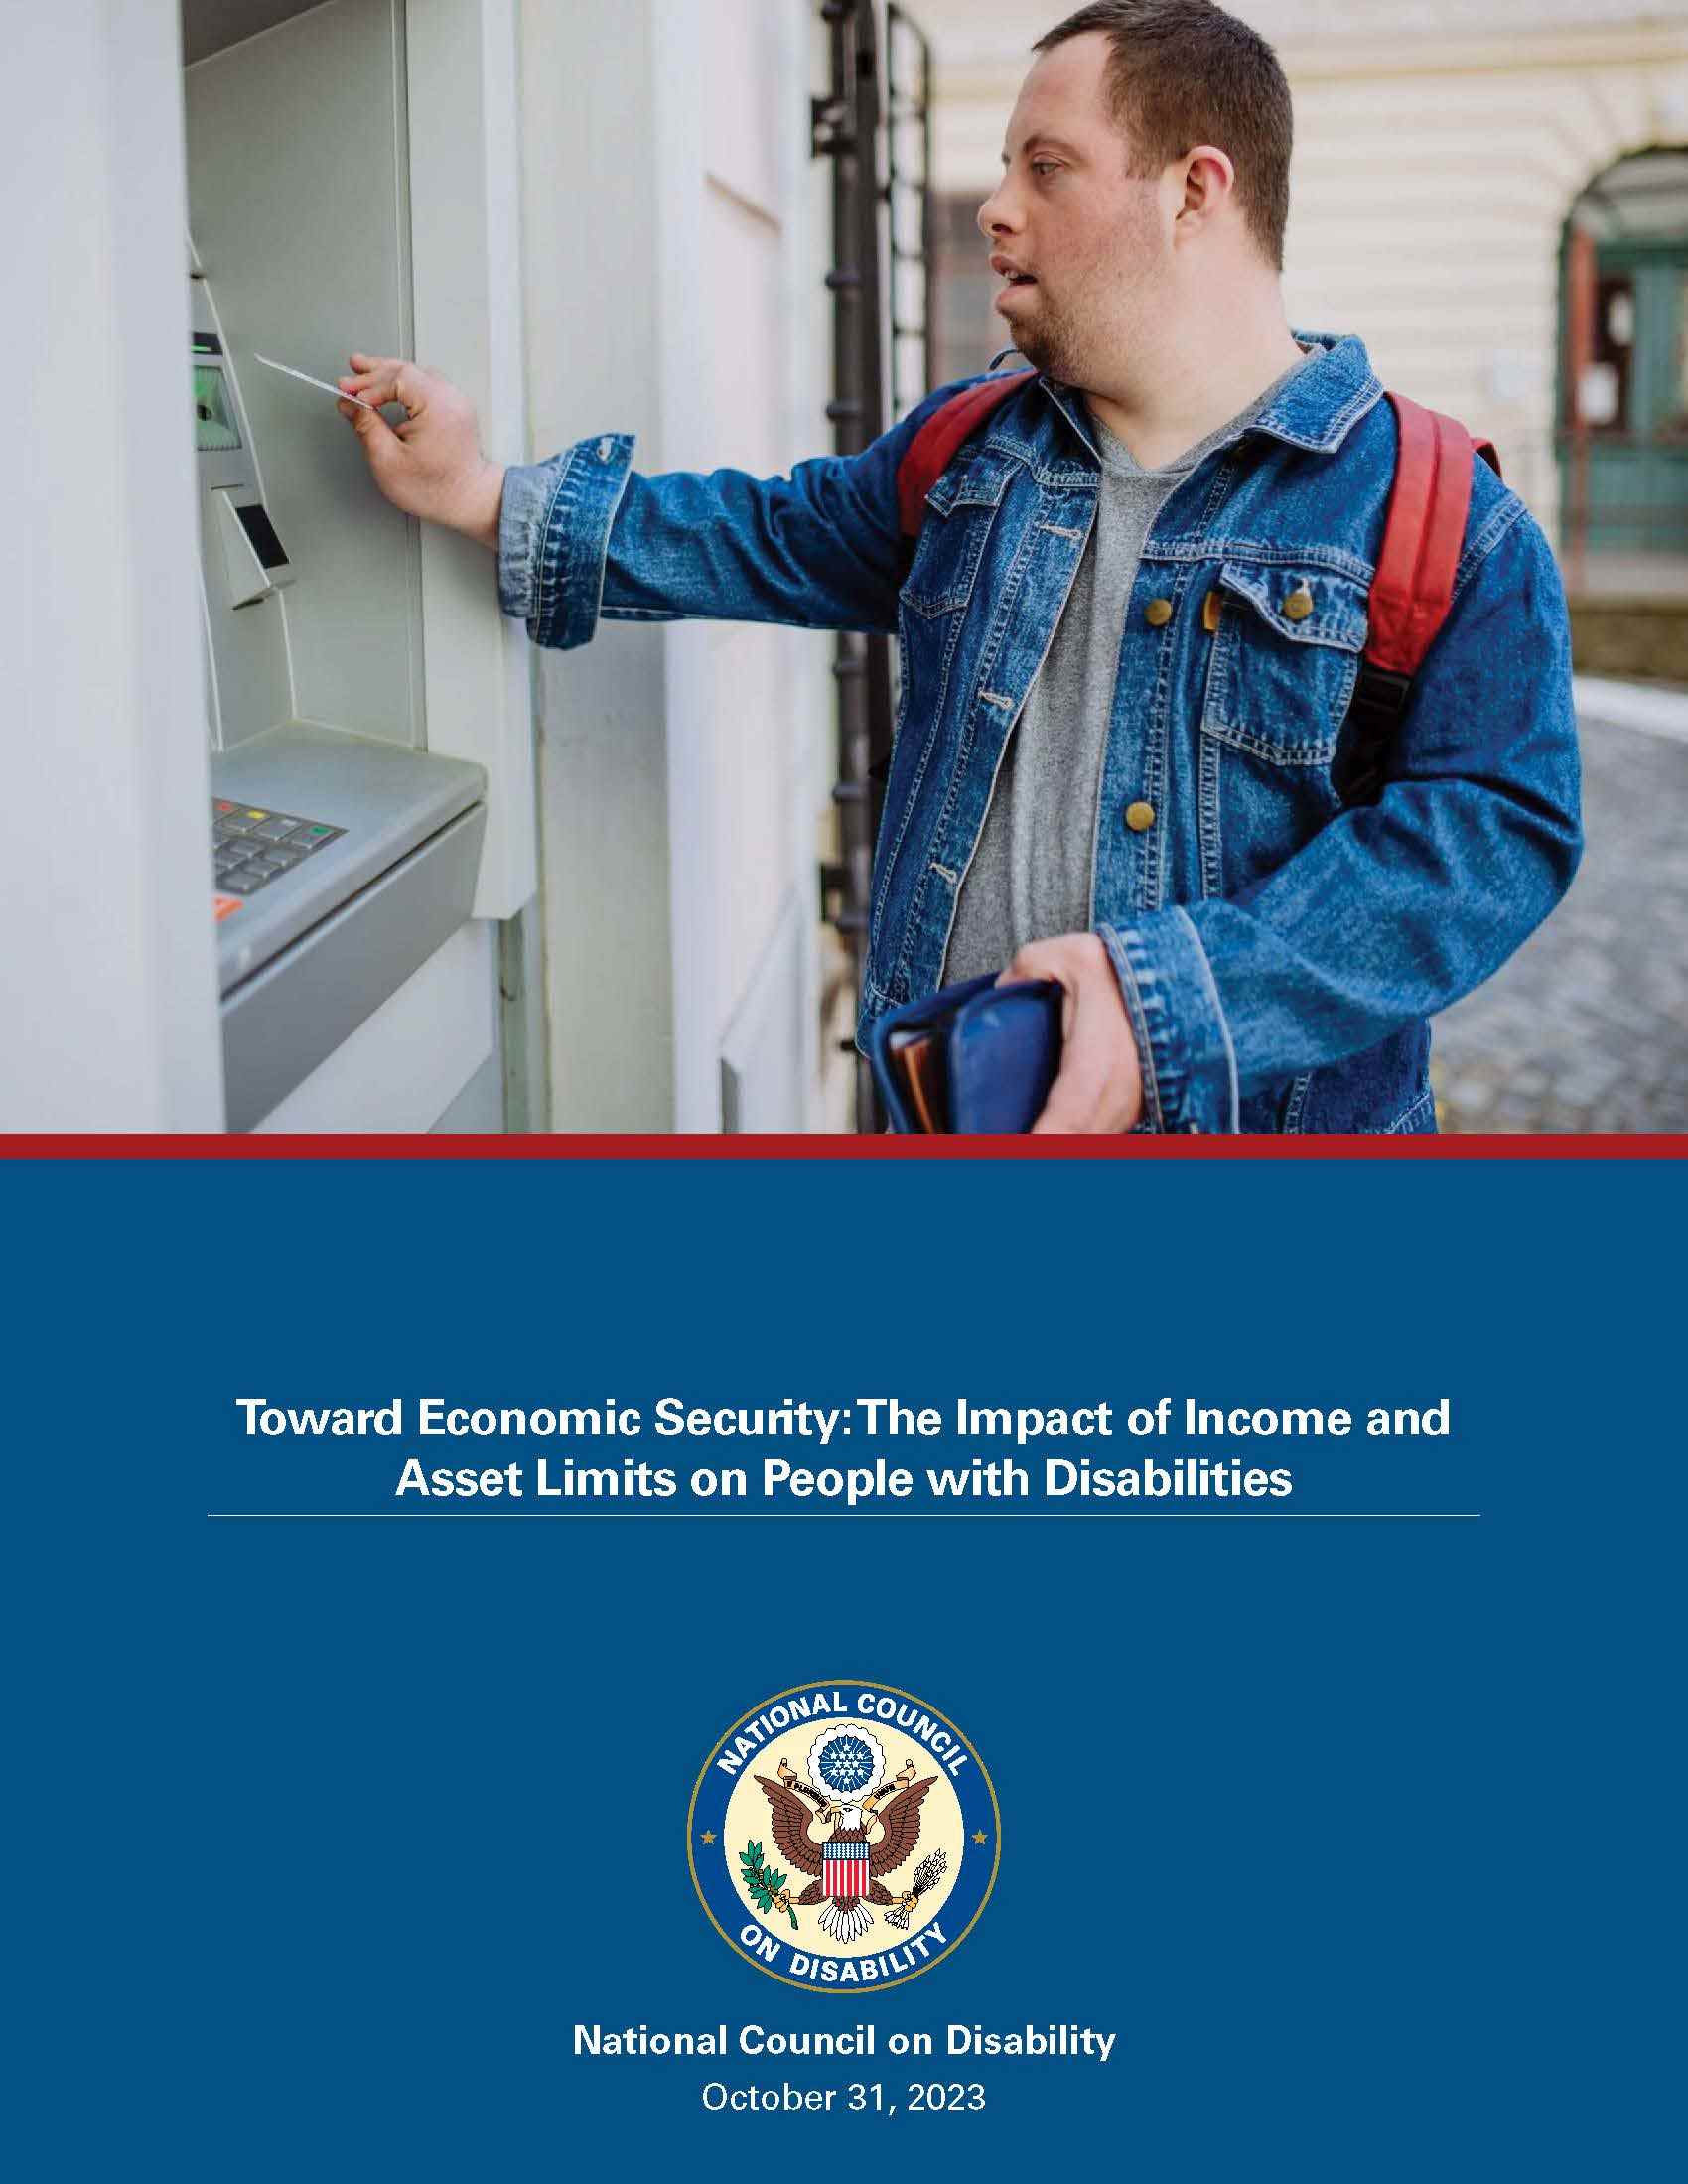 Report cover features a man with Down syndrome wearing jean jacket and red backpack gets money from an ATM machine. A blue rectangle below has the report title, NCD seal and date Oct. 31, 2023.